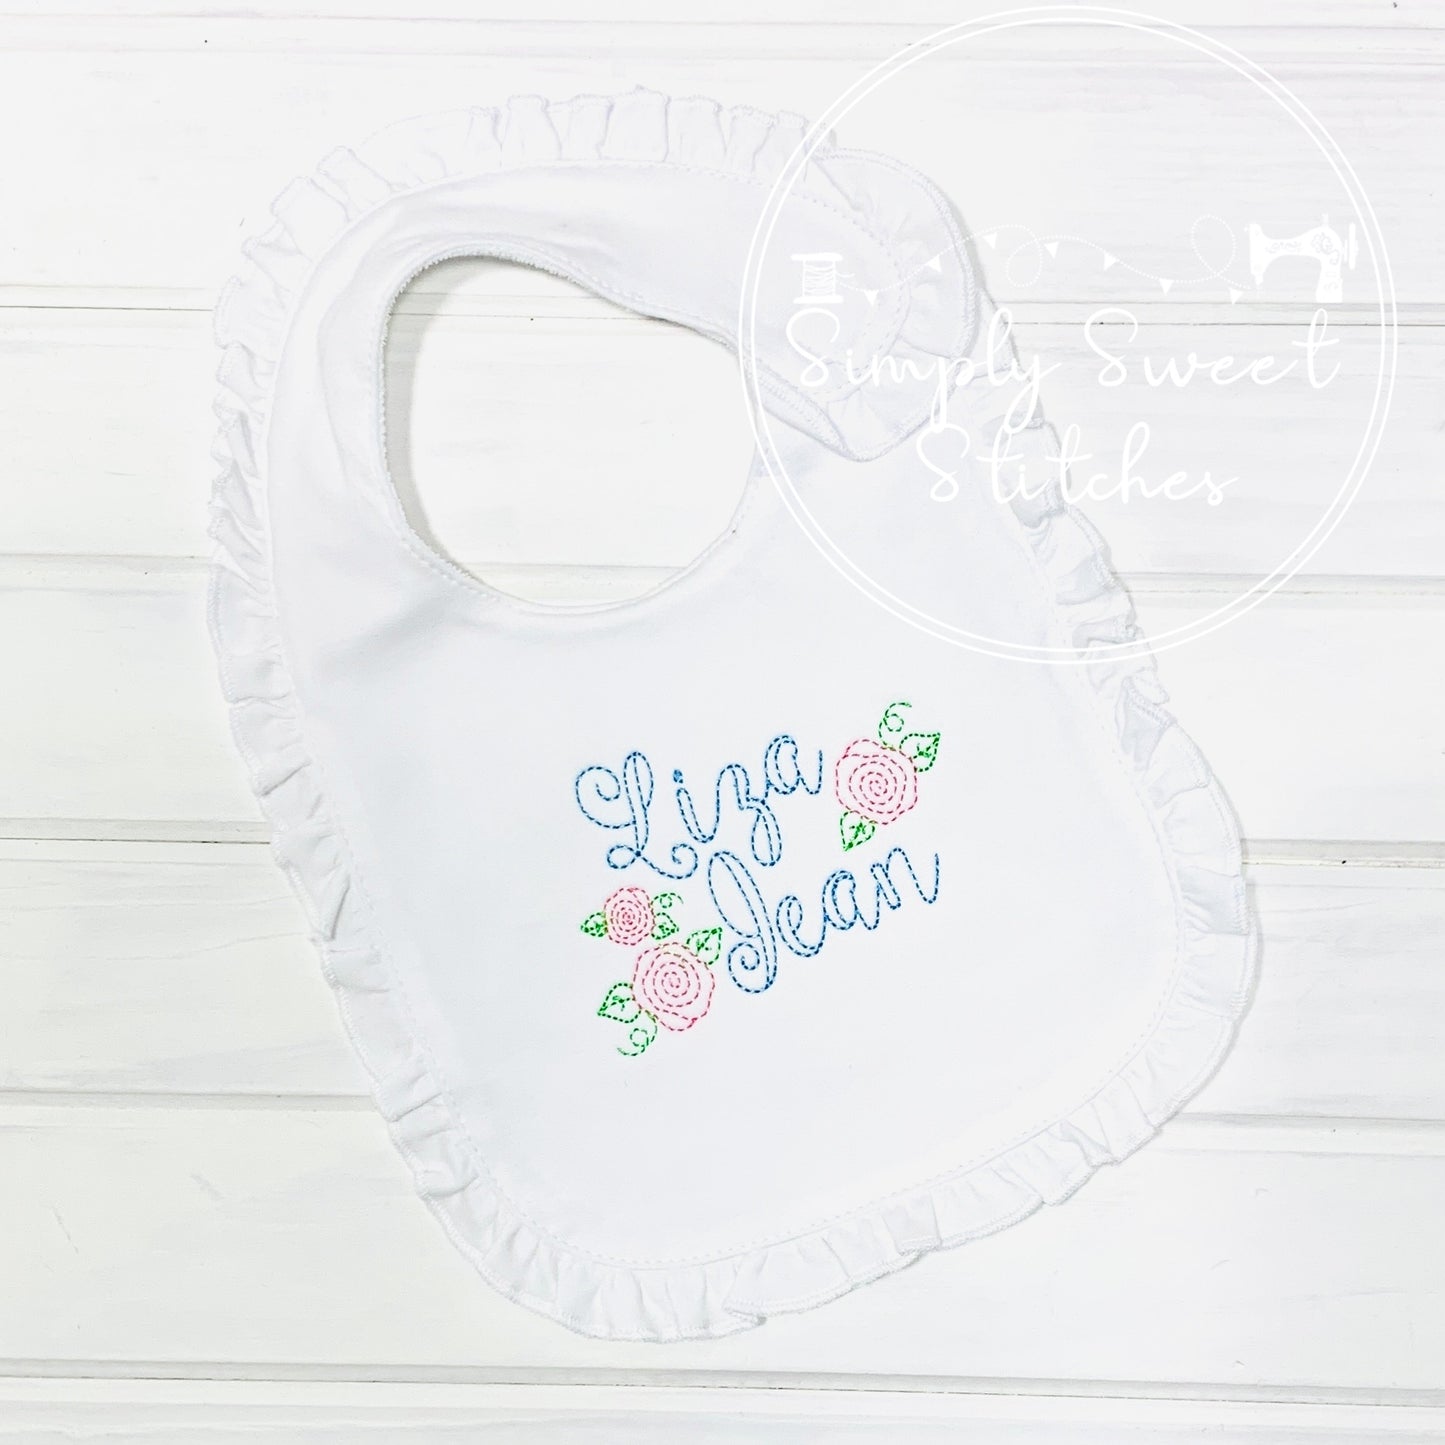 1392 - NAME WITH FLOWERS - EMBROIDERY BIB